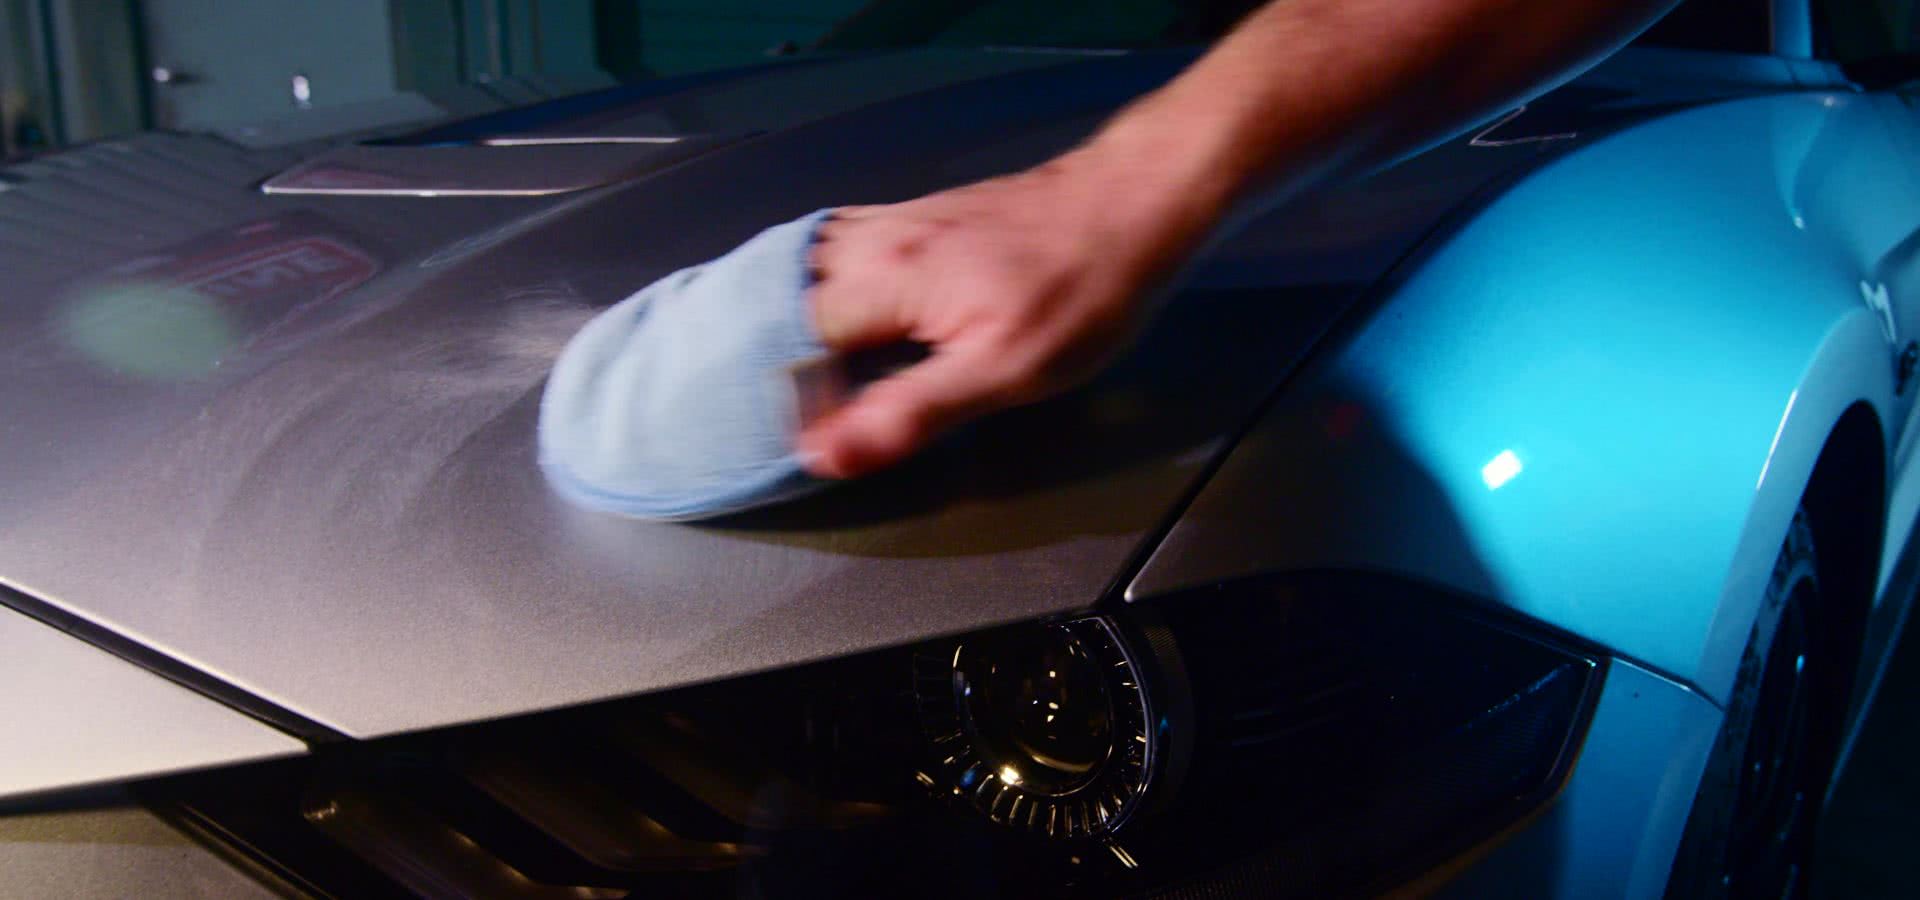 How To Make Your Car Shine Like New